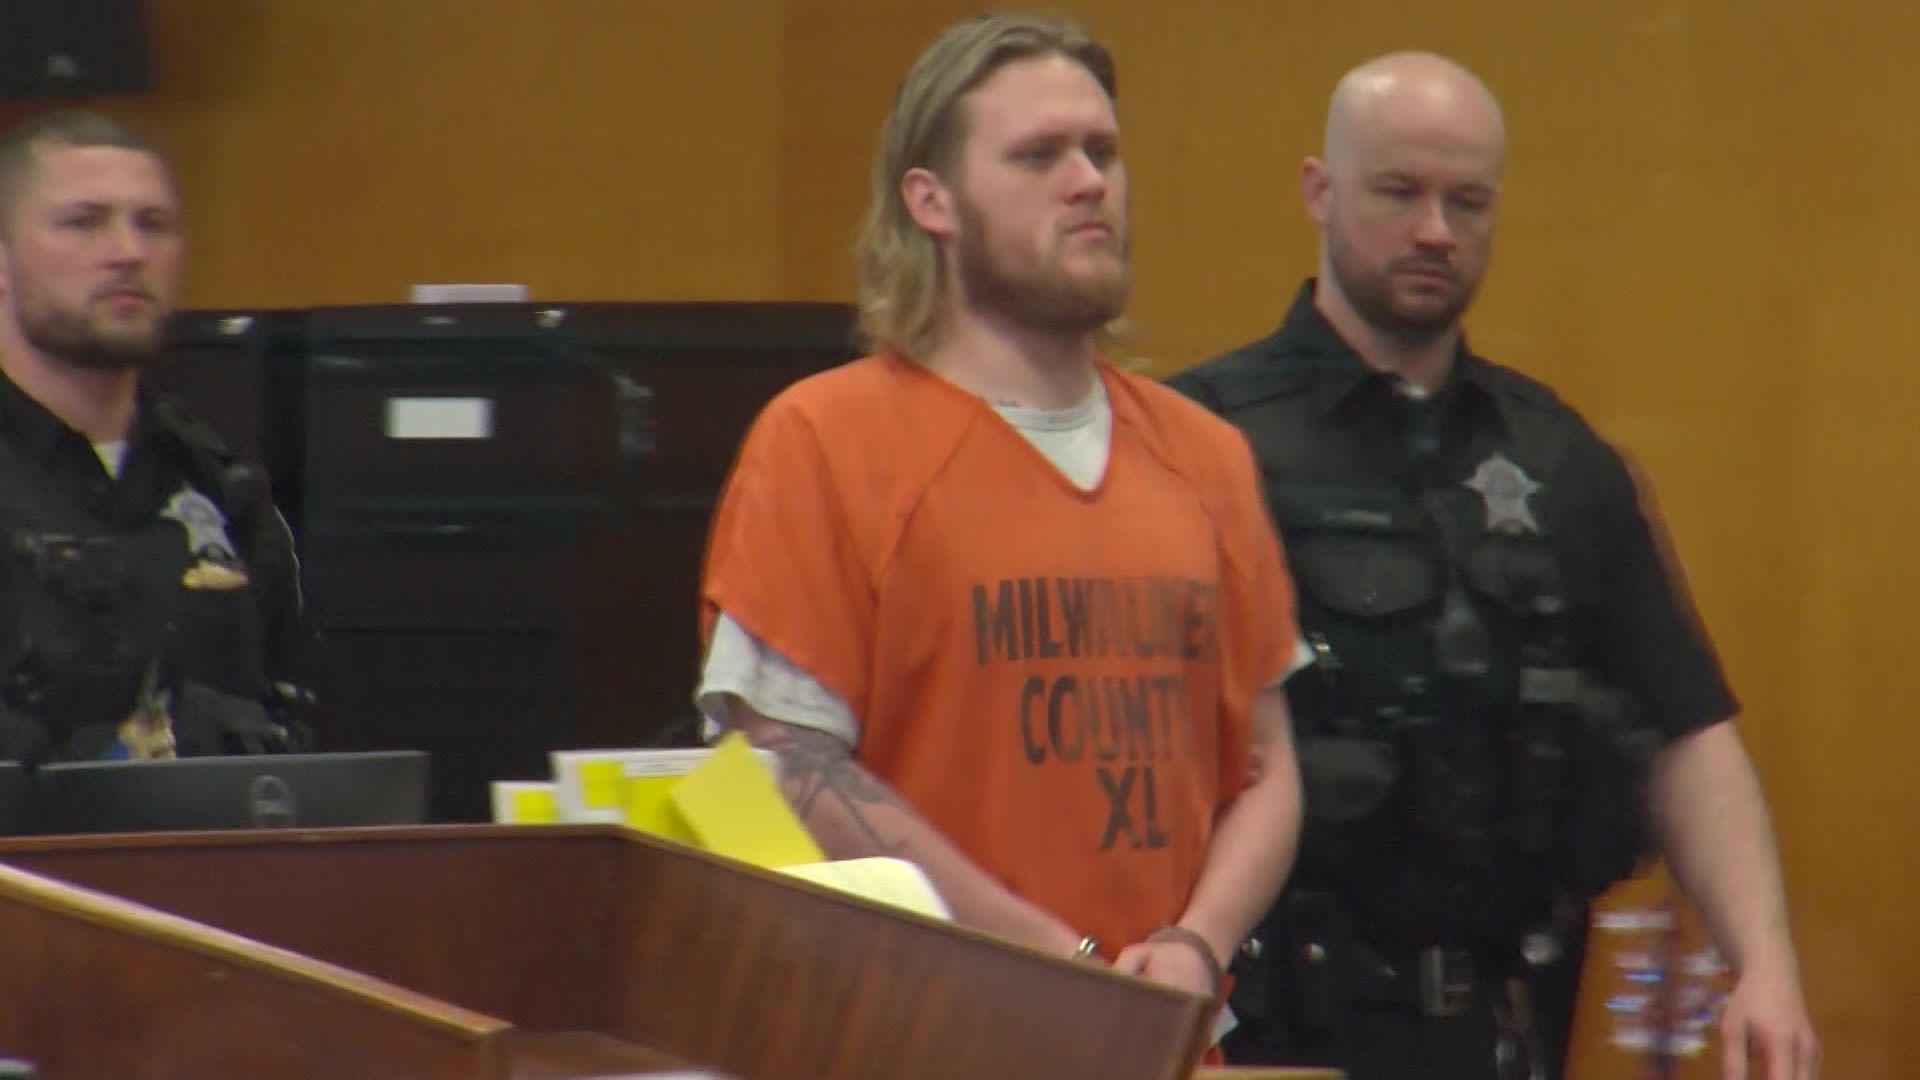 Maxwell Anderson appears in court, attorneys ask for time to review evidence